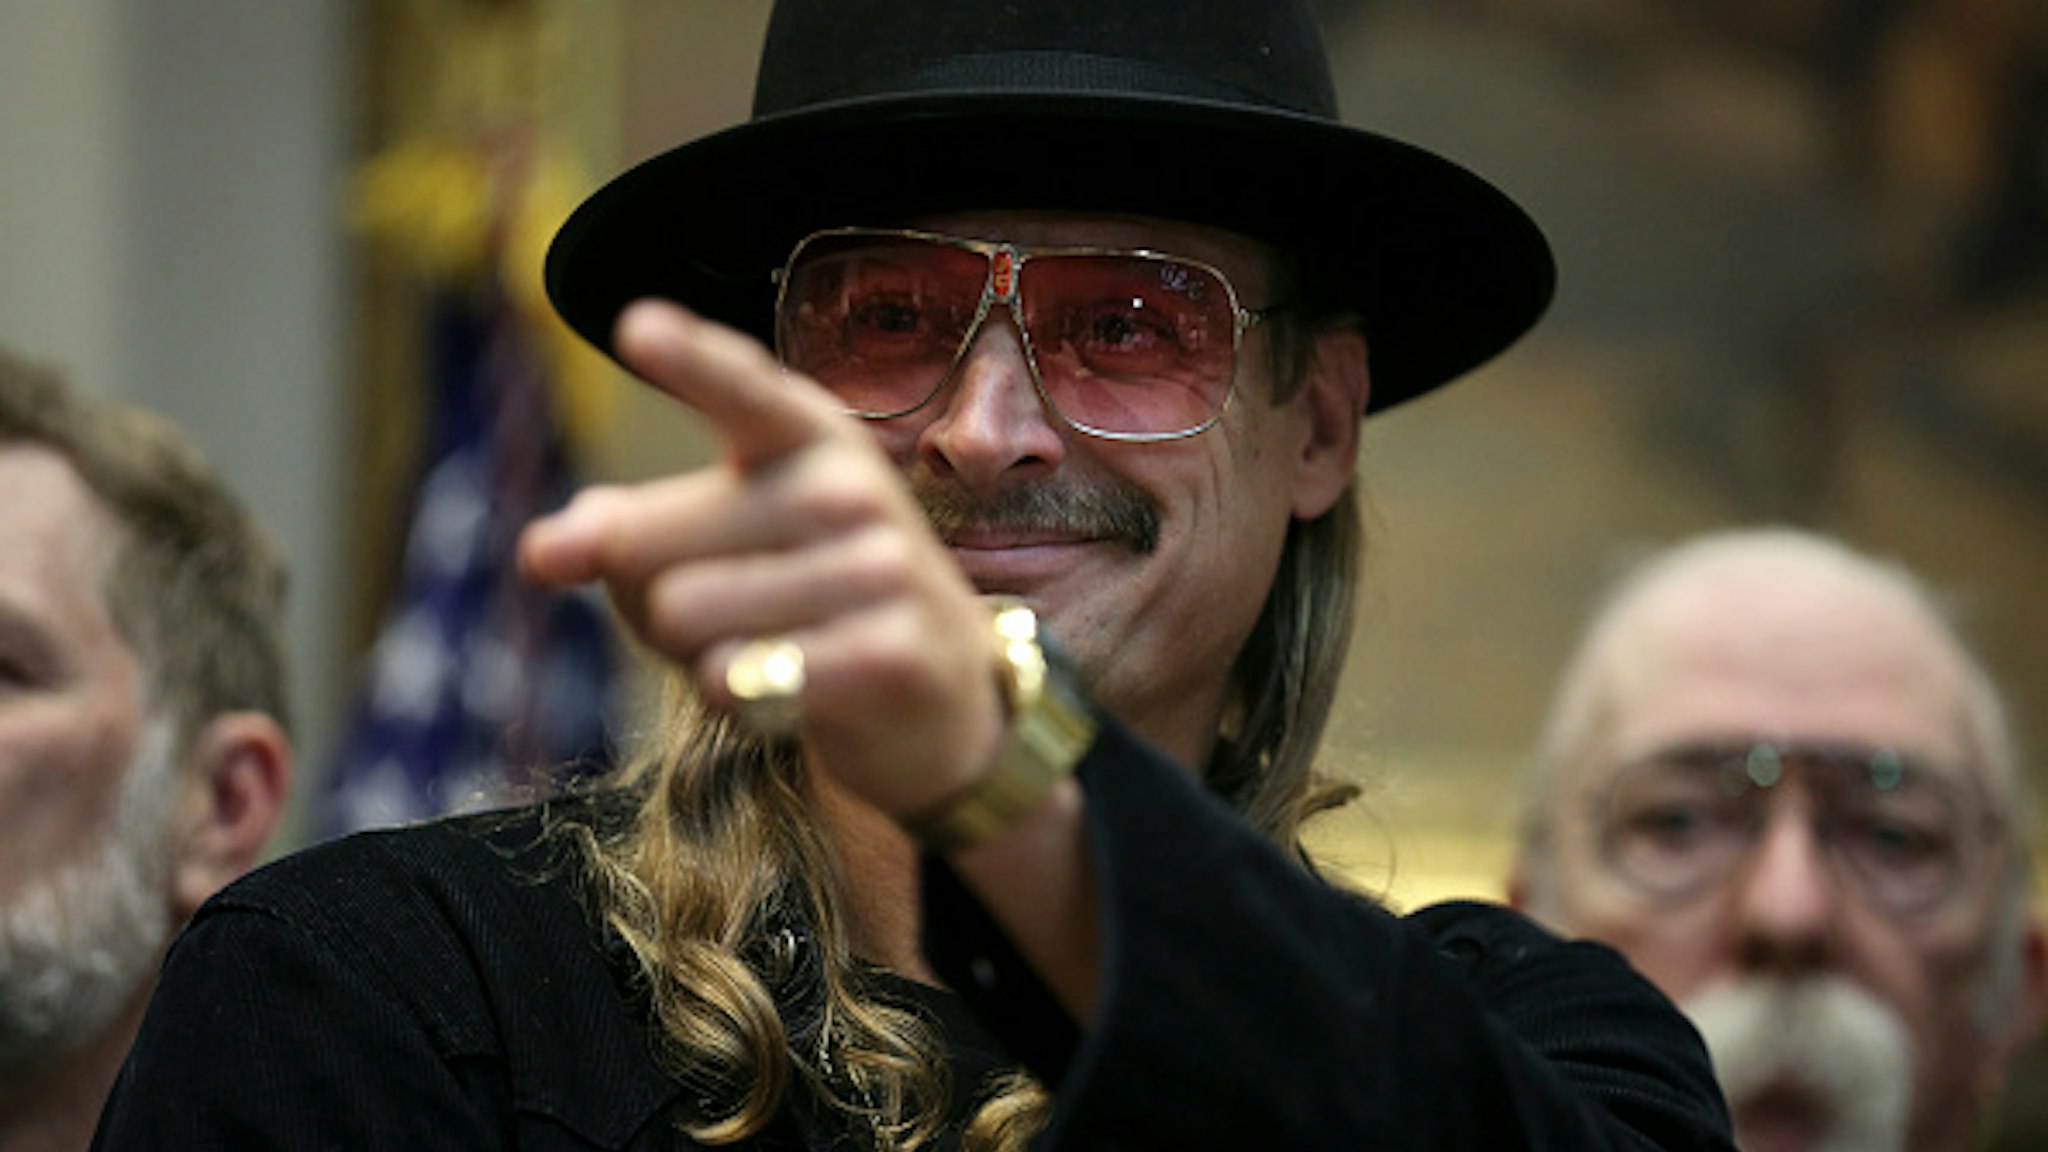 WASHINGTON, DC - OCTOBER 11: (AFP OUT) Kid Rock attends a signing ceremony as U.S. President Donald Trump signs the H.R. 1551, the 'Orrin G. Hatch-Bob Goodlatte Music Modernization Act' in the Roosevelt Room of the White House on October 11, 2018 in Washington, DC.